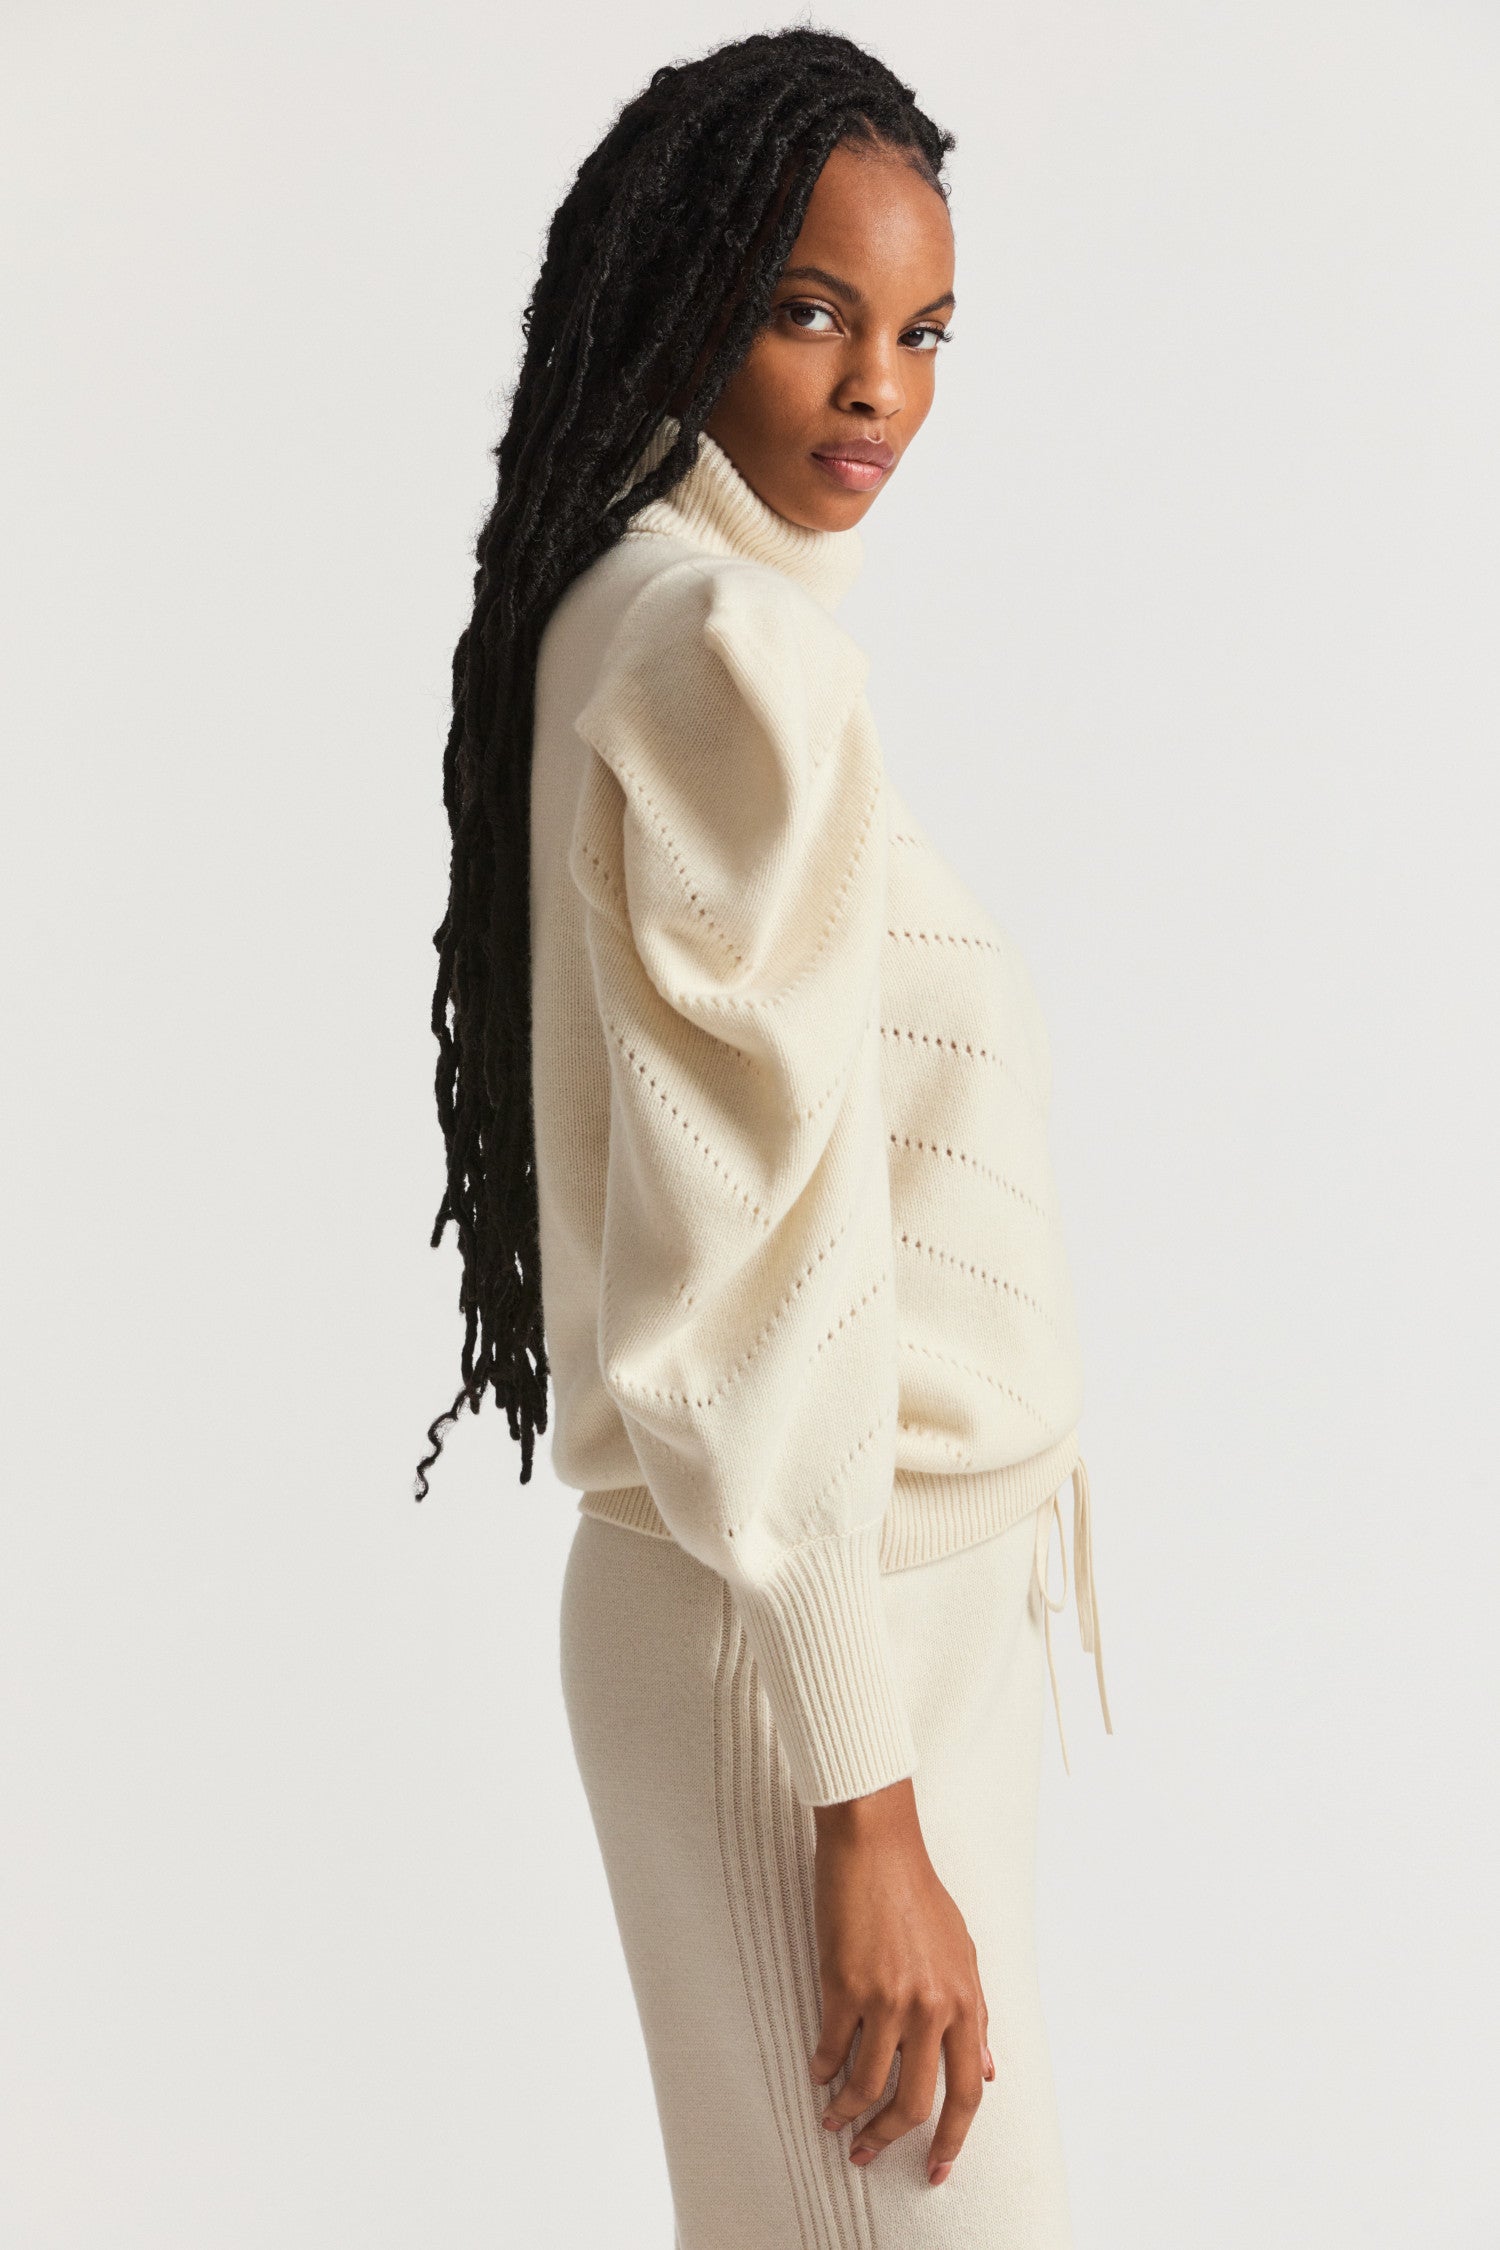 Cream sweater turtleneck in a wool cashmere fabric.  With angel chevron pointelle detailing on the front and pleated Victorian-inspired sleeves with a high cuff.